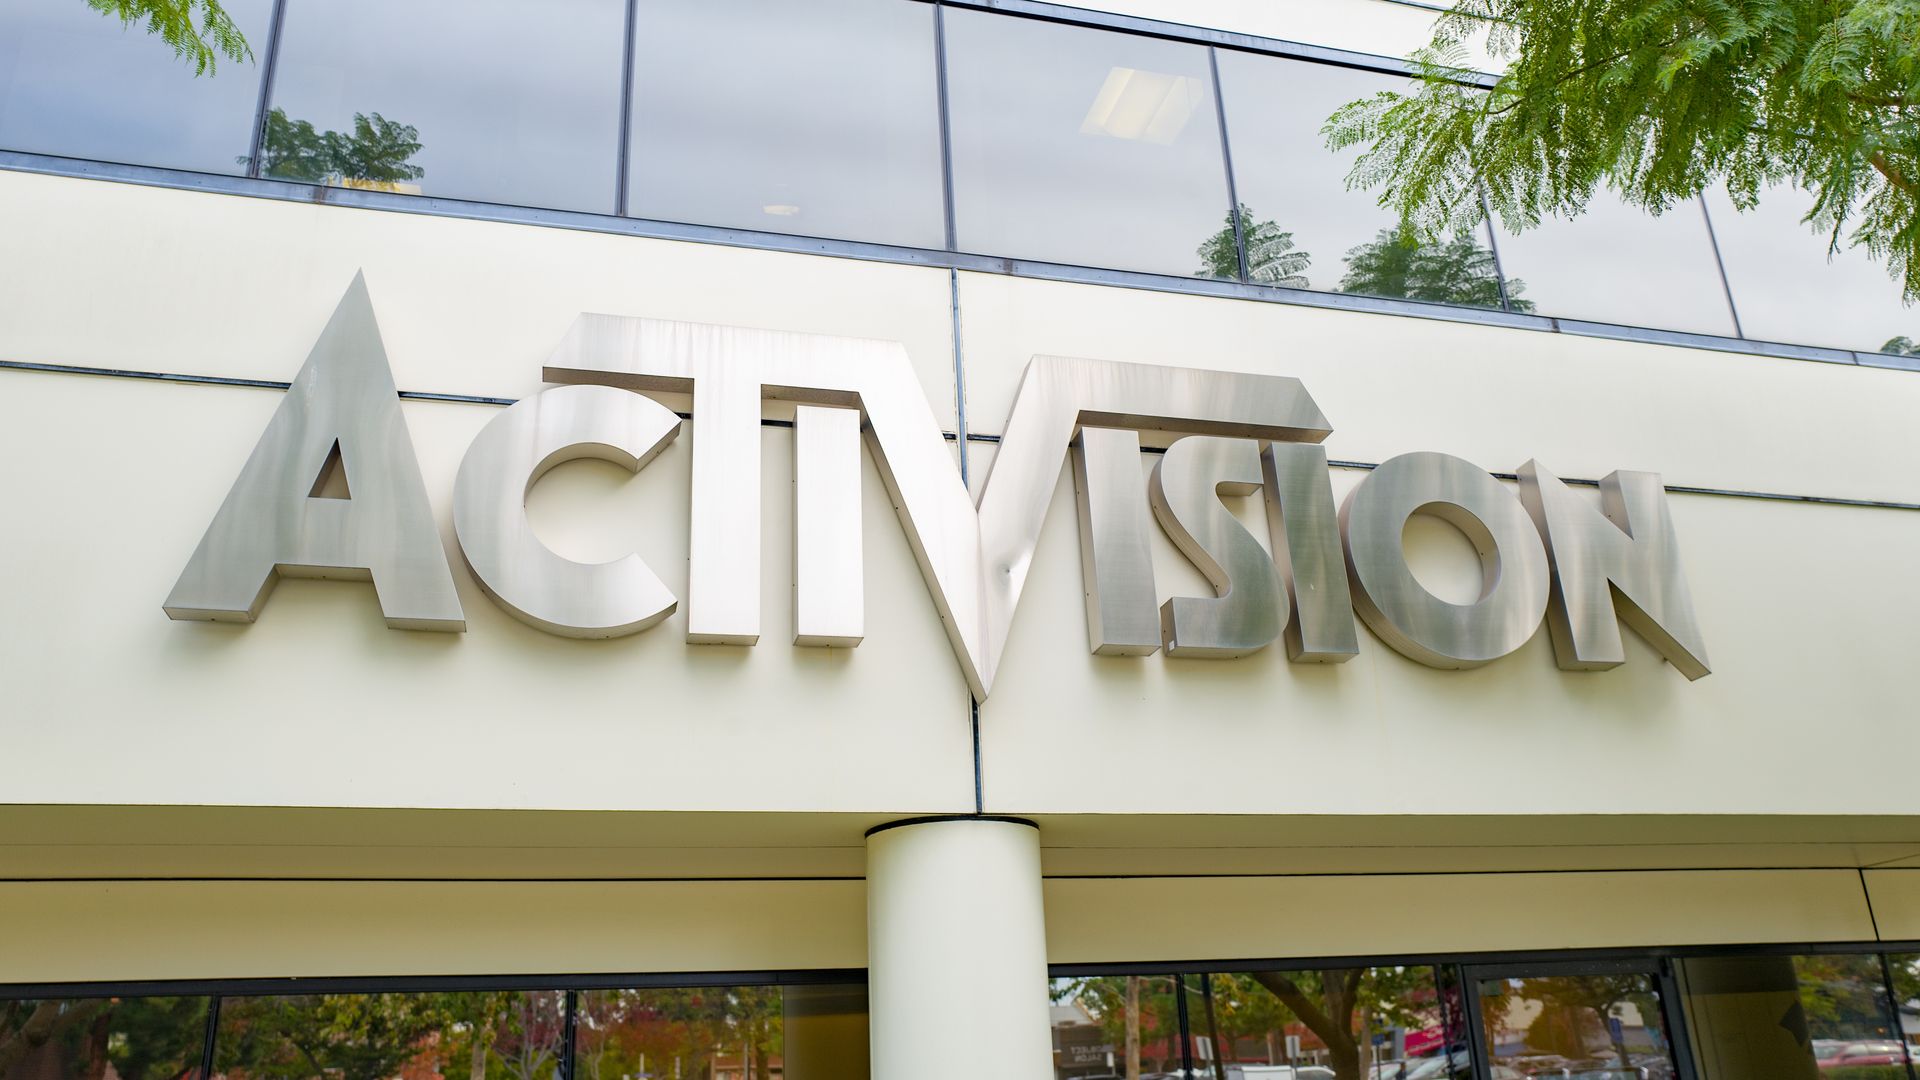 Photo of the facade of an office building. The Activision logo is on the exterior